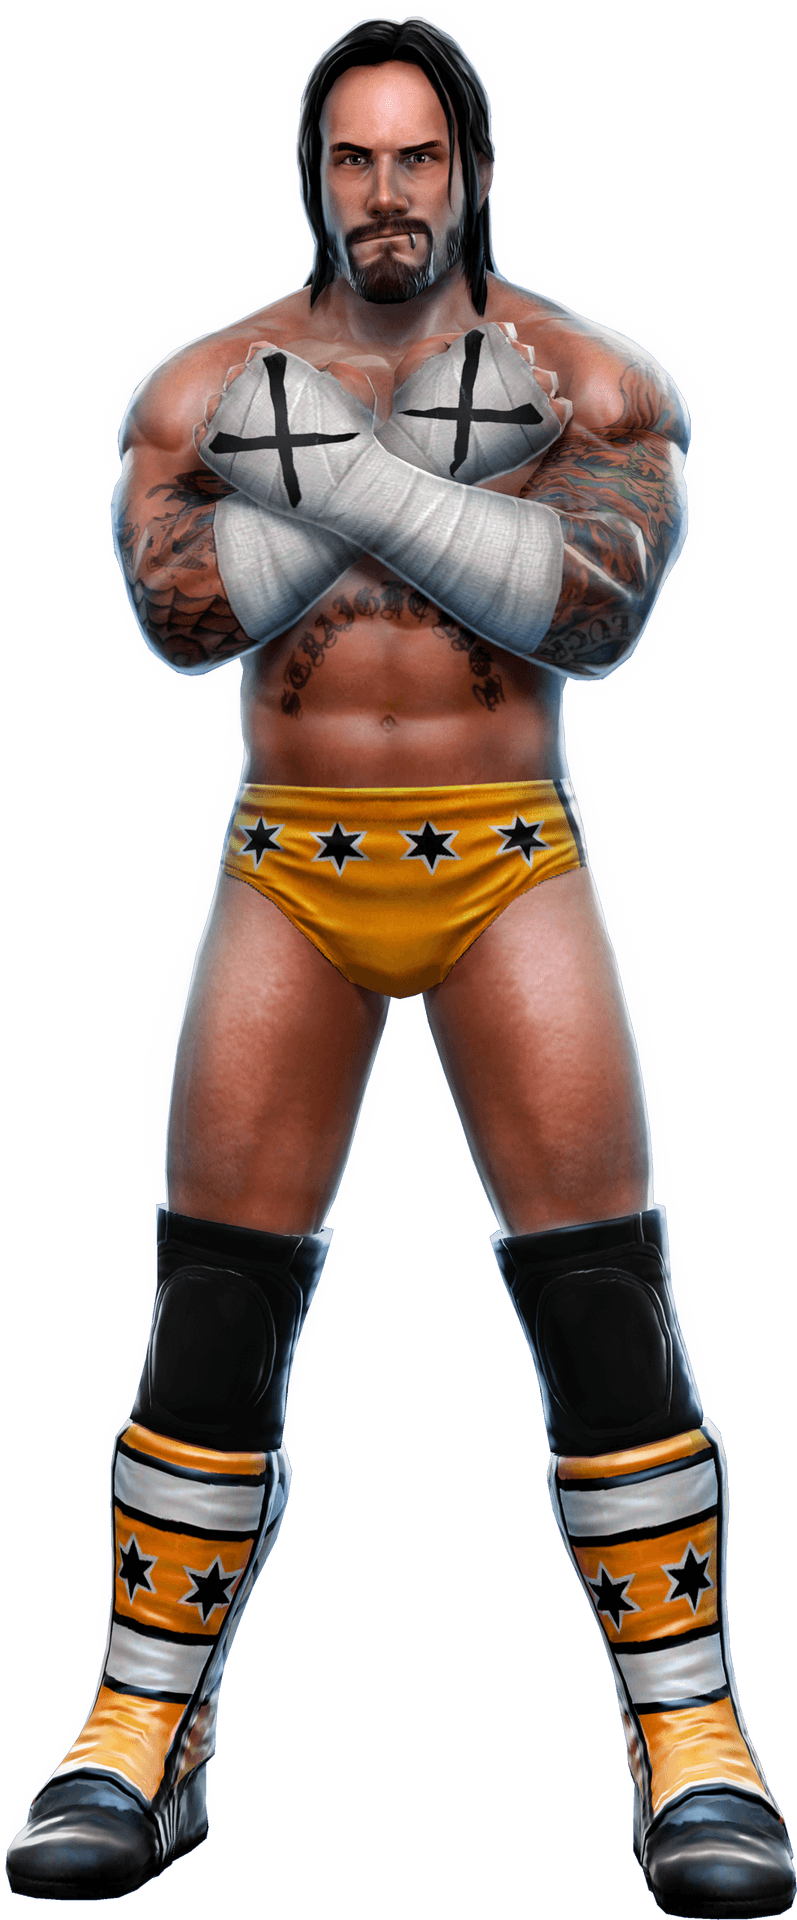 Wrestler_with_ Tattoos_and_ Star_ Trunks PNG